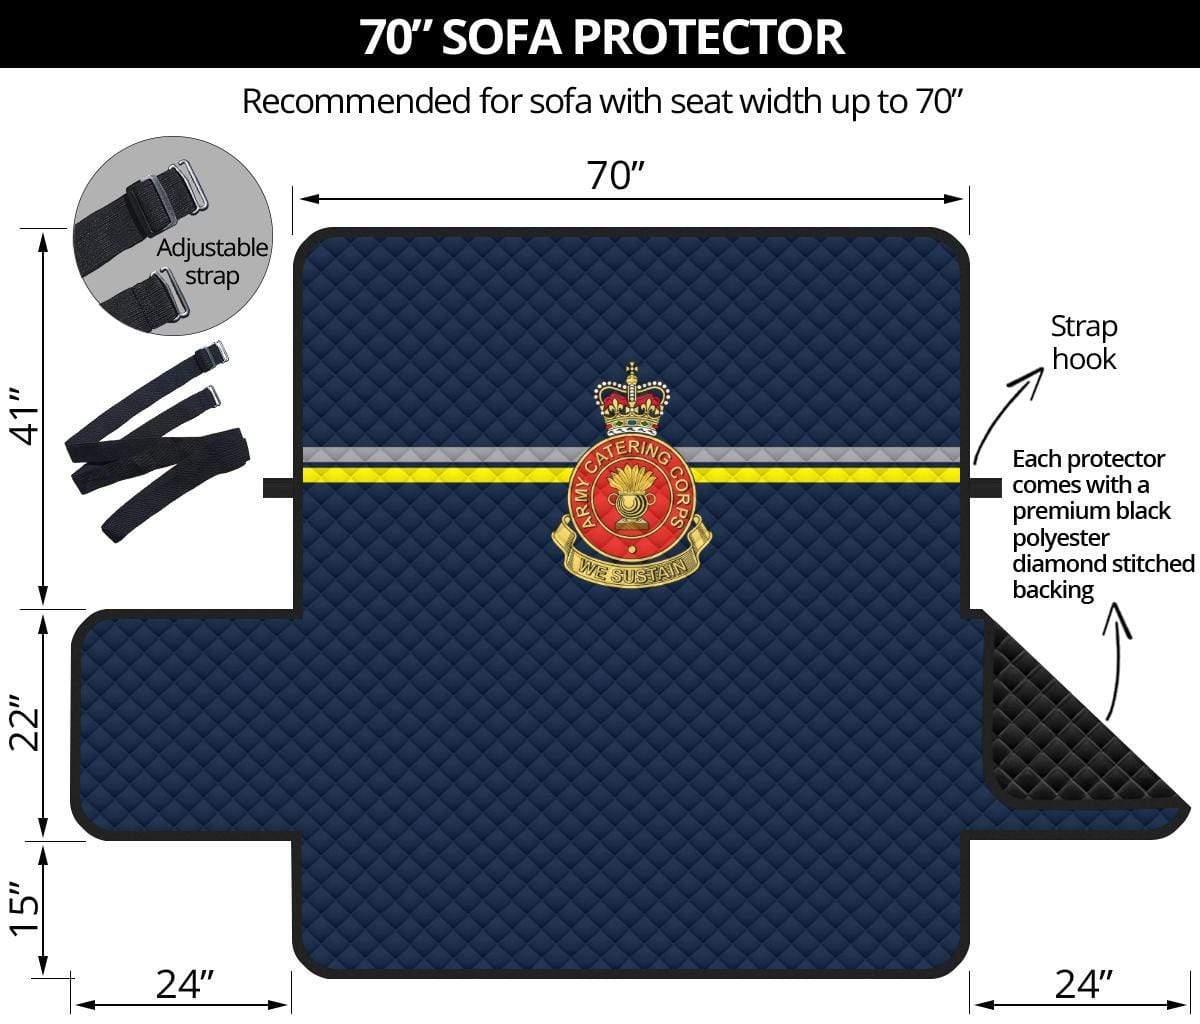 sofa protector 70" Army Catering Corps 3-Seat Sofa Protector